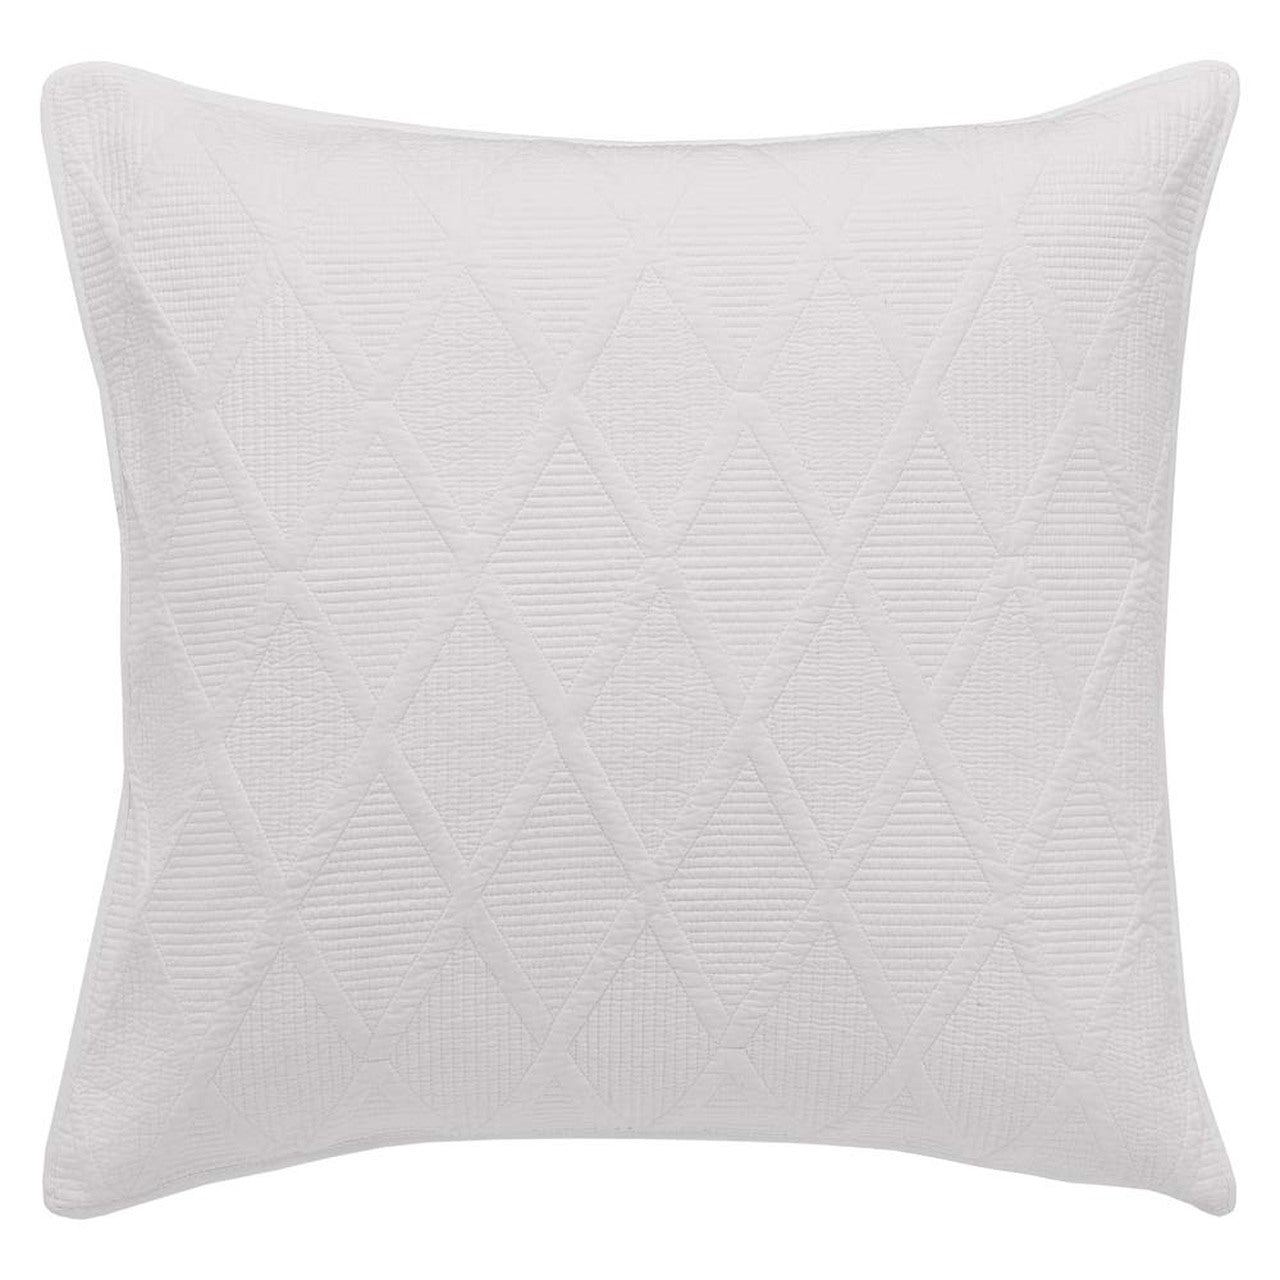 Farley White European Pillowcase by Private Collection